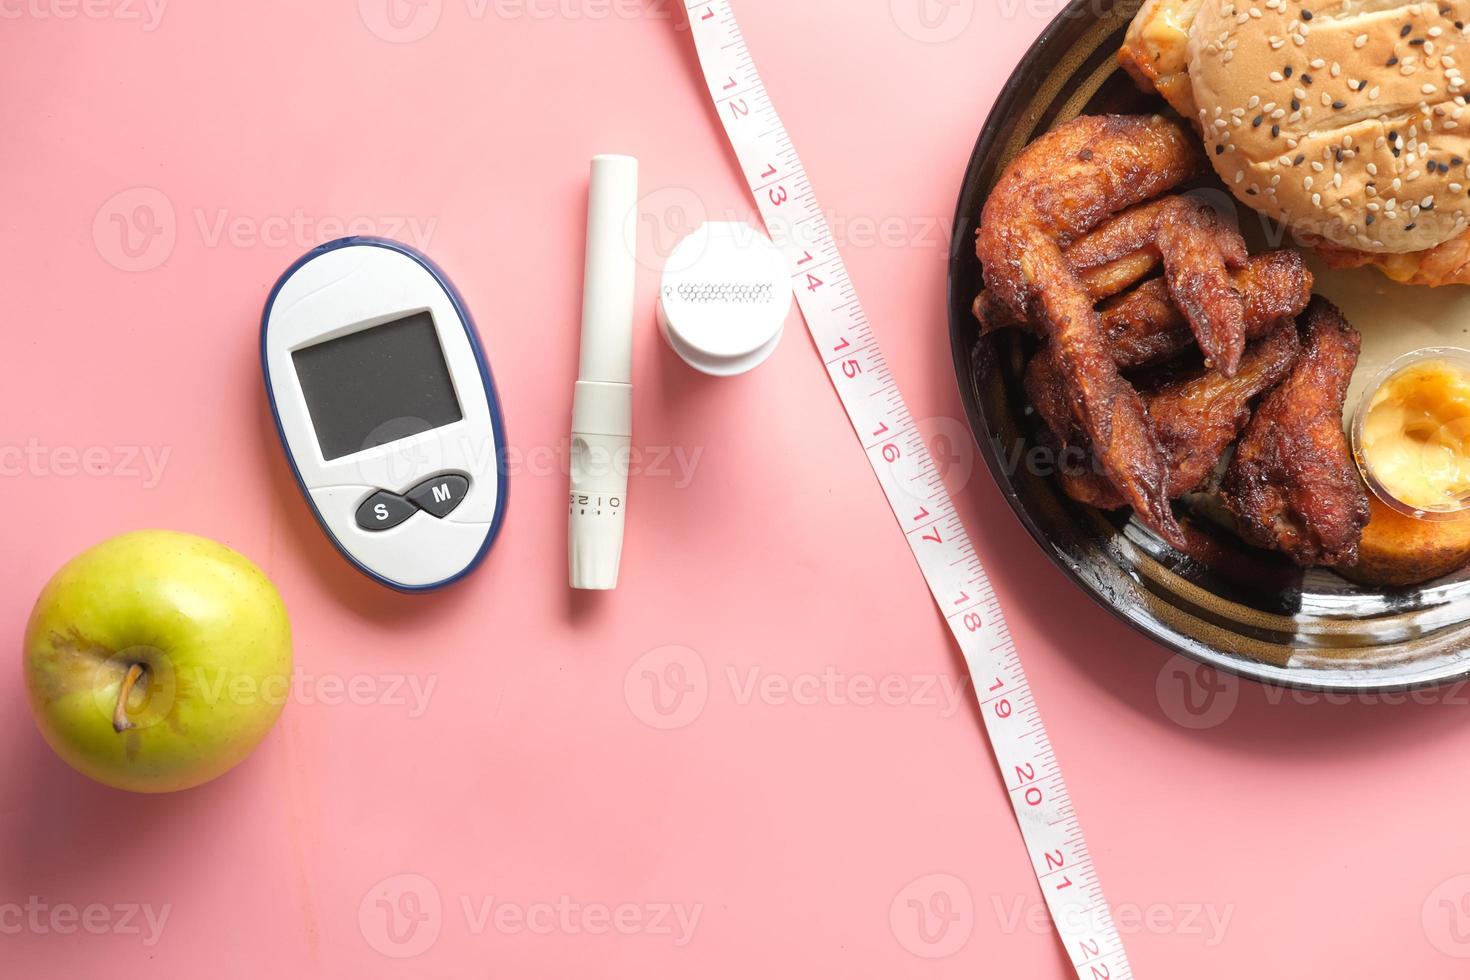 Diabetic measurement tools with apple and meal on pink background photo